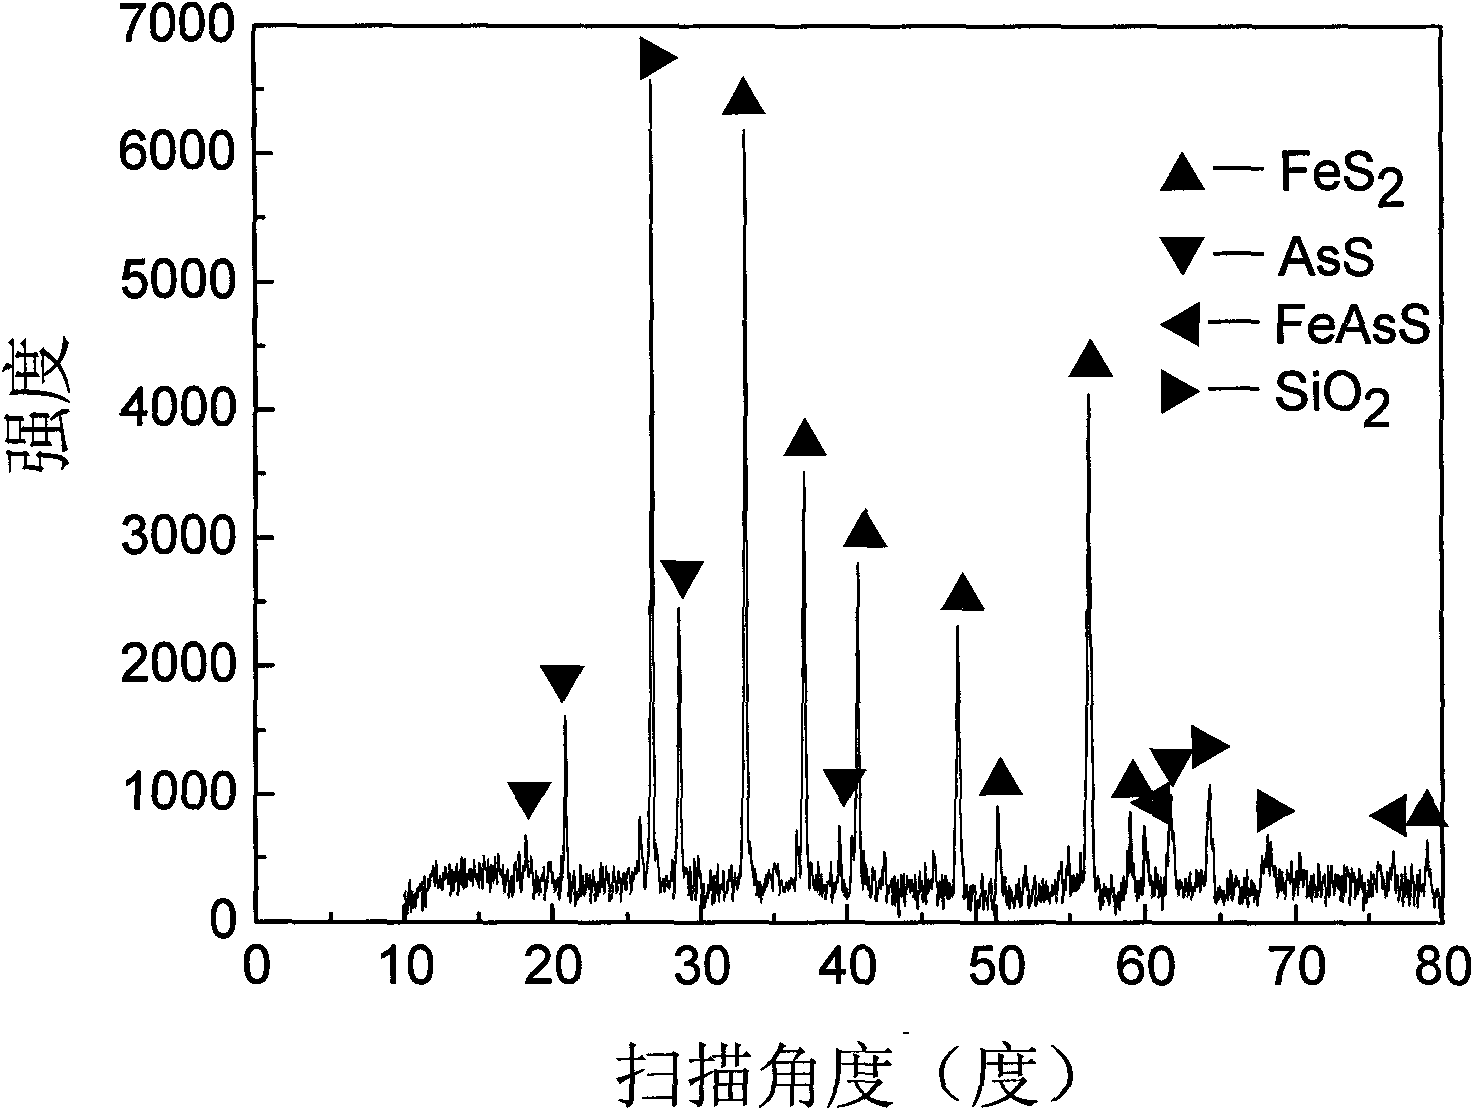 Bacterial oxidation pretreatment and cyanidation gold extraction method of arsenopyrite and realgar type refractory gold ores